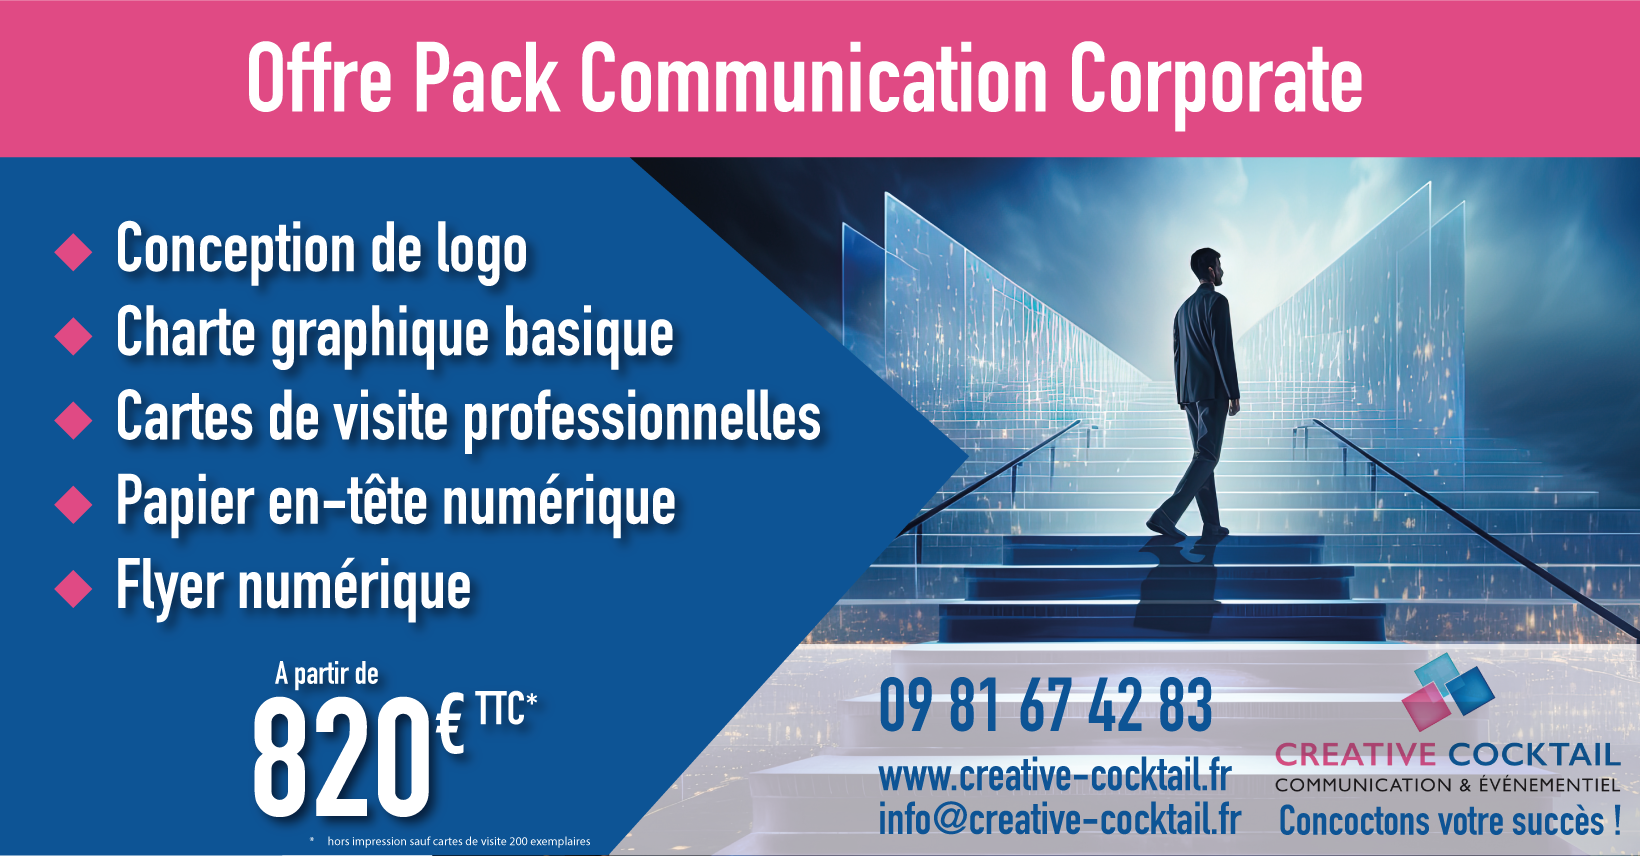 Offre Pack Communication Corporate